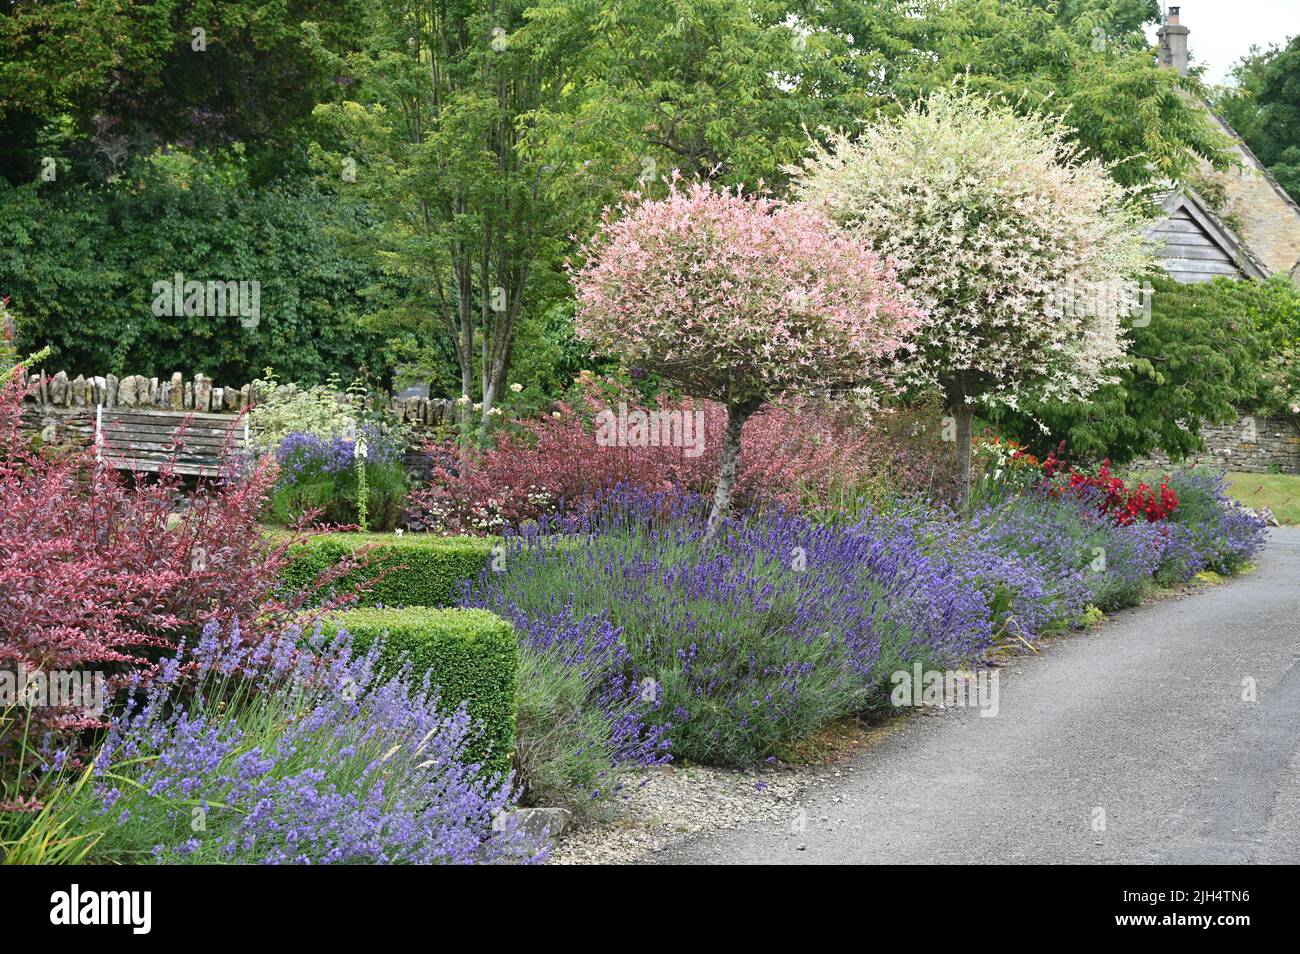 The front garden of a house in the Gloucestershire village of Upper Slaughter shows off a display of lavender and jasmine in flower amongst other plan Stock Photo